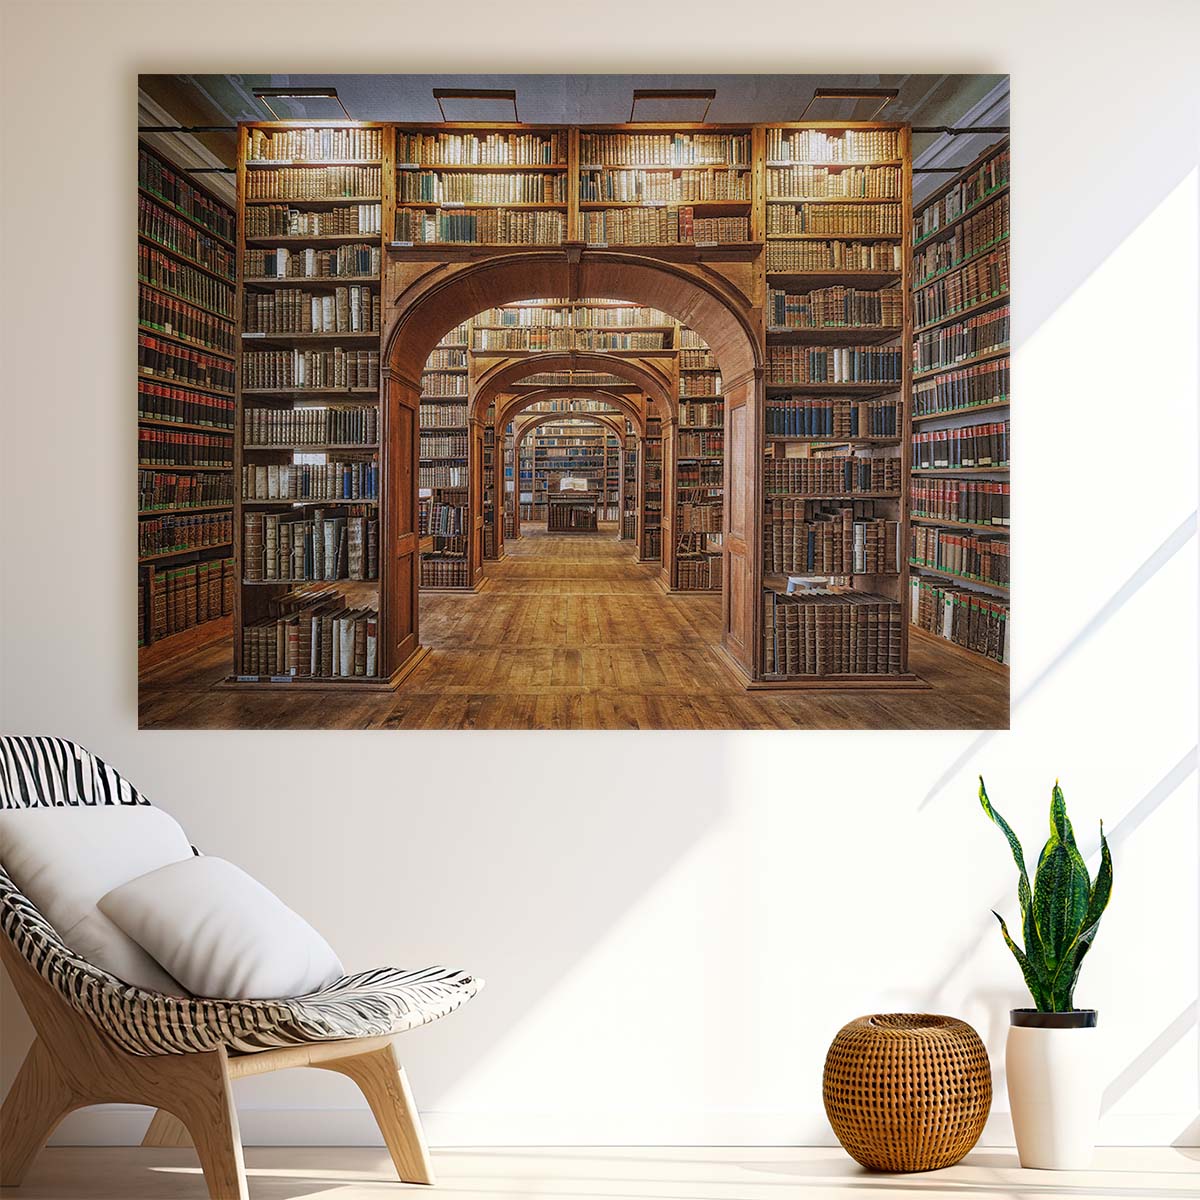 Upper Lausitzian Library Interior, Gorlitz Germany - Architectural Photography Wall Art